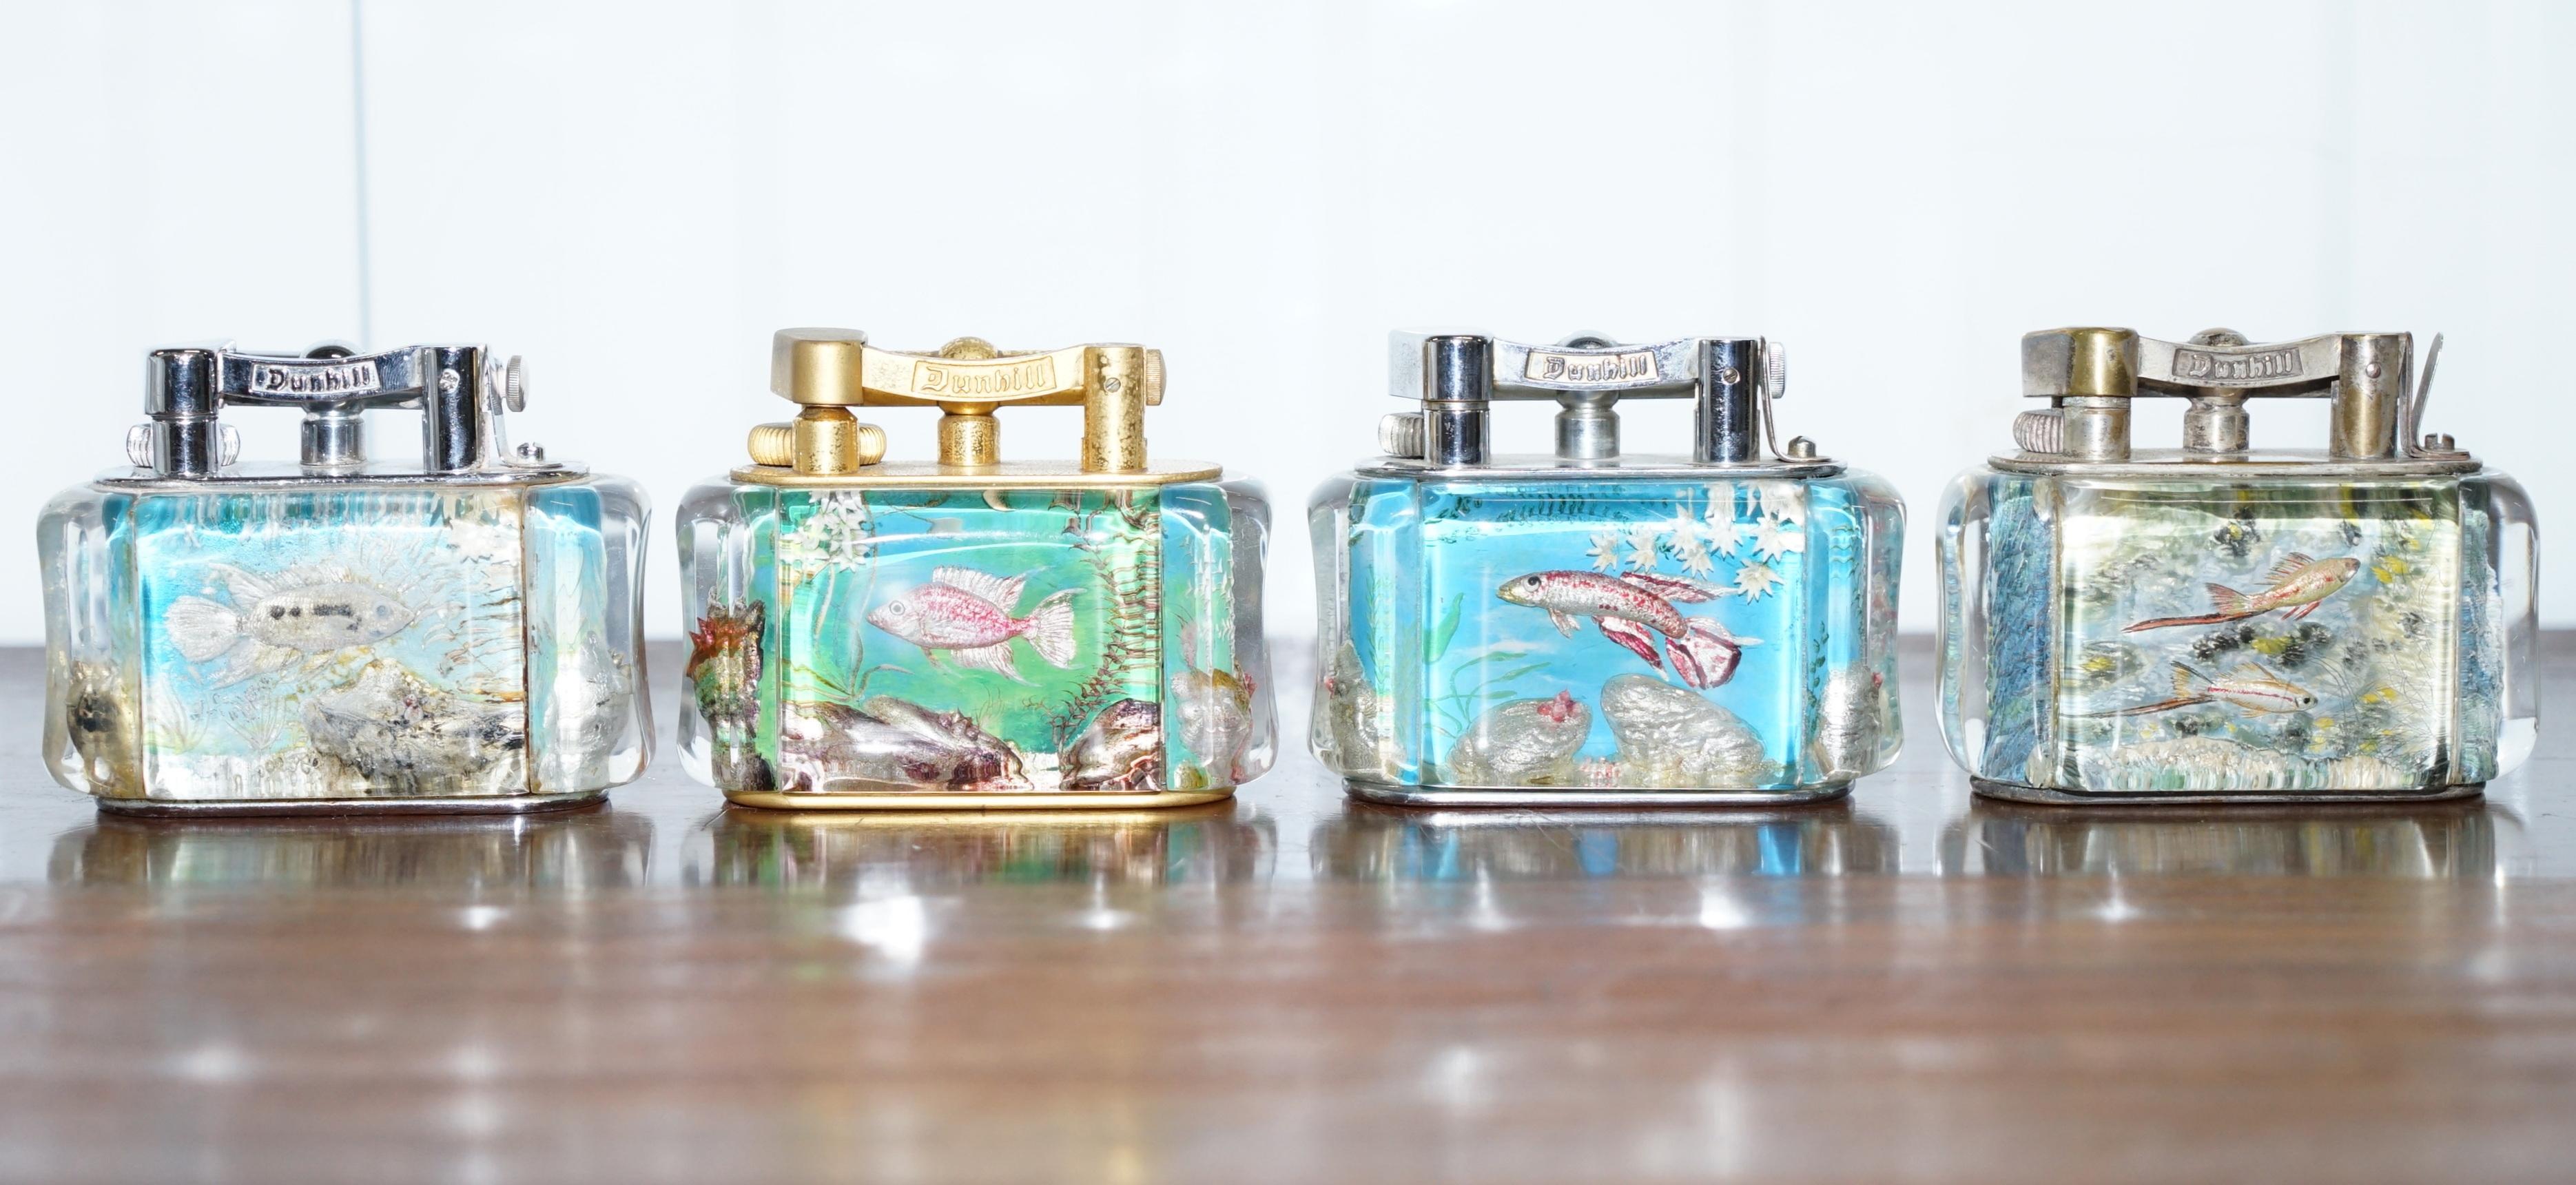 We are delighted to offer for sale is this very rare original 1950s handmade in England oversized Dunhill Aquarium table lighter

Ben Shillingford (1904-2000) worked for Dunhill in the 1950s and perfected the art of carving and painting lucite